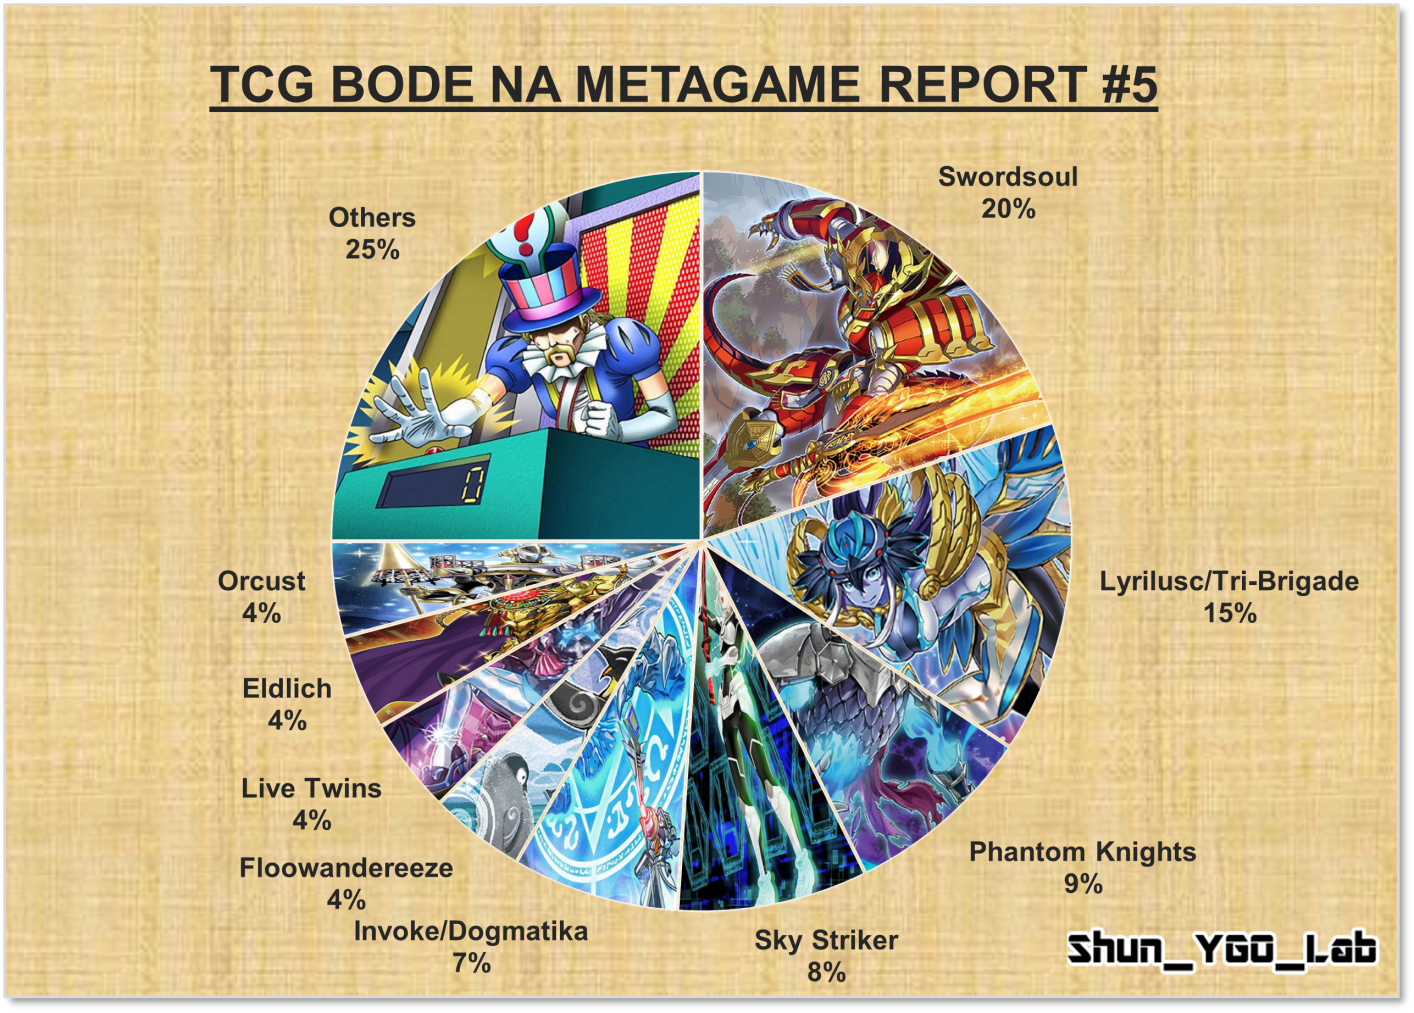 TCG BODE Metagame Tournament Report Week 5 YGOPRODeck